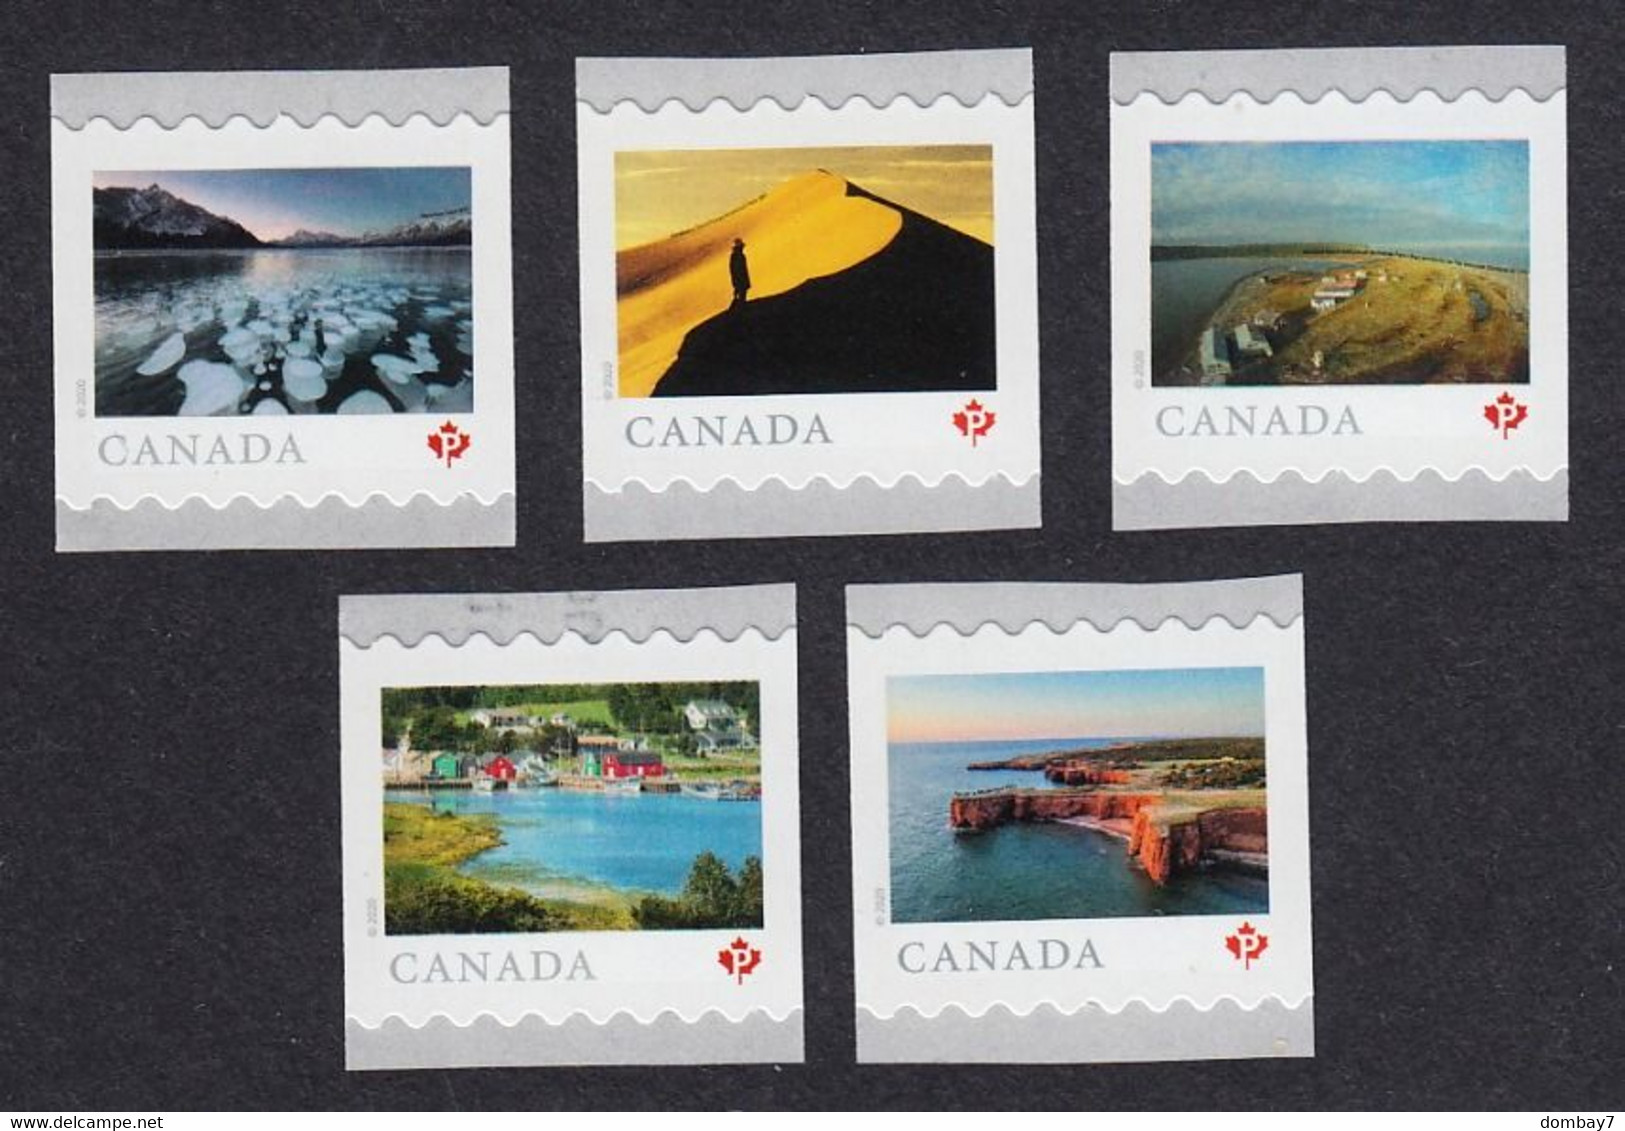 Qc. FROM FAR AND WIDE = Full Set Of 5 Stamps Cut From COIL / ROLL = MNH Canada 2020 Sc #3212-3216 - Unused Stamps